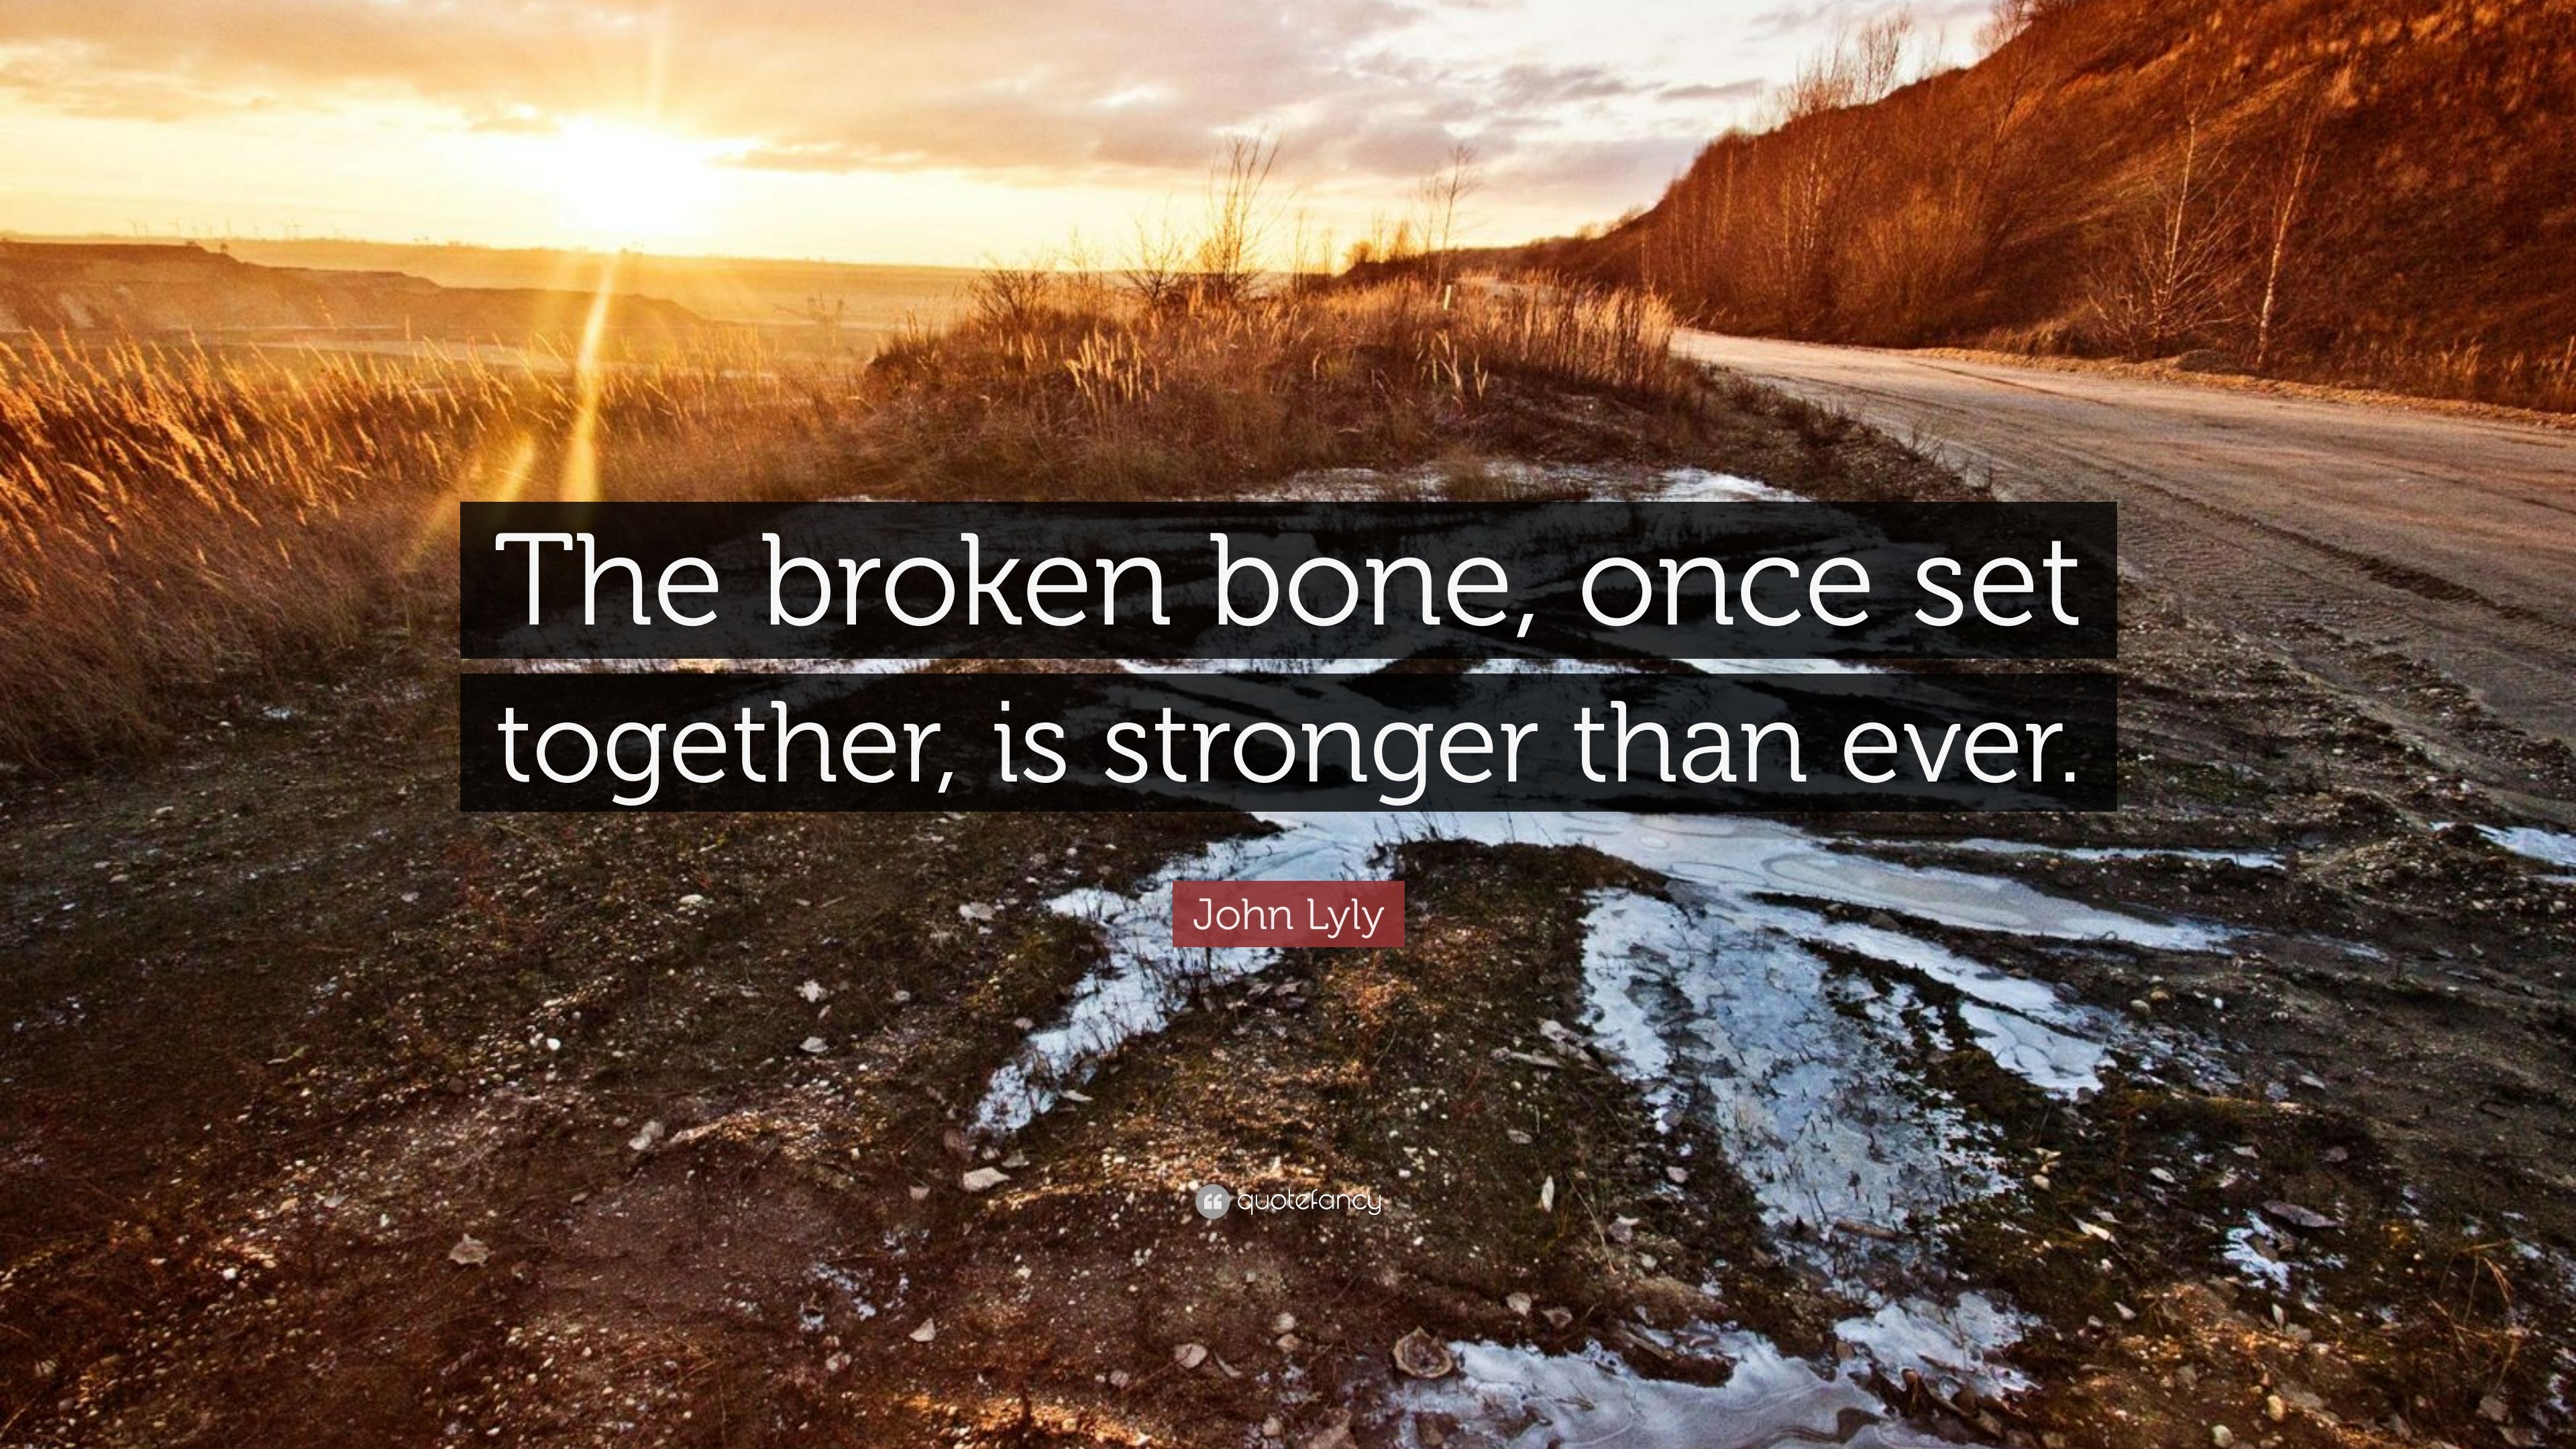 John Lyly Quote: “The broken bone, once set together, is stronger than ever.”